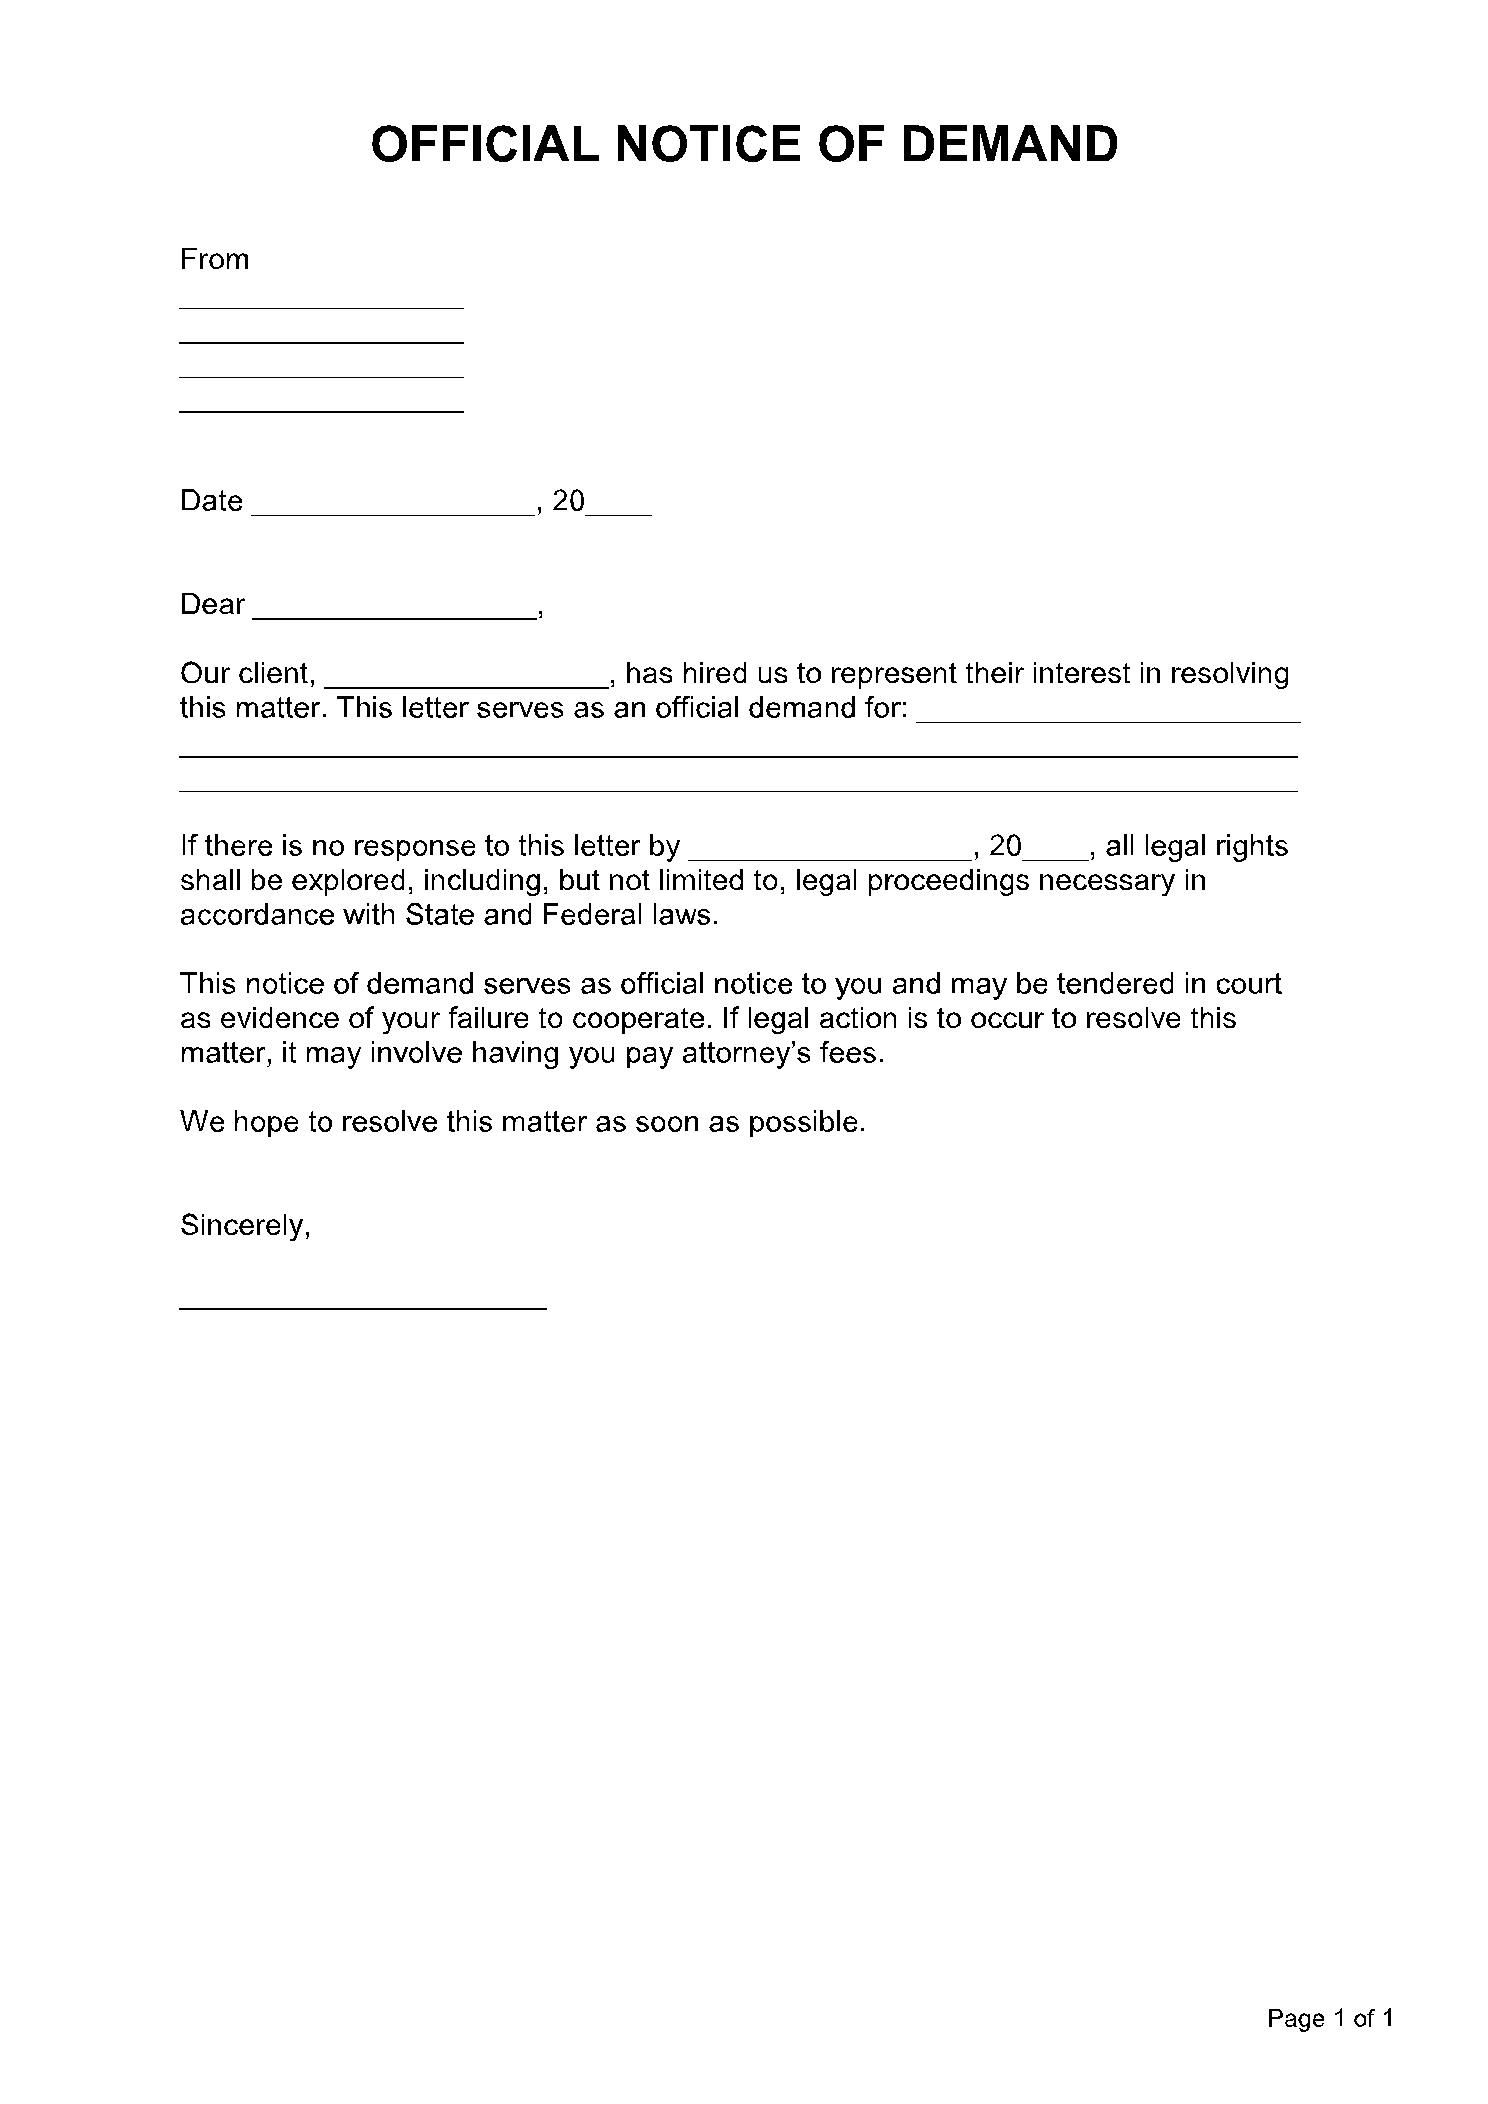 Demand Letter from Attorney